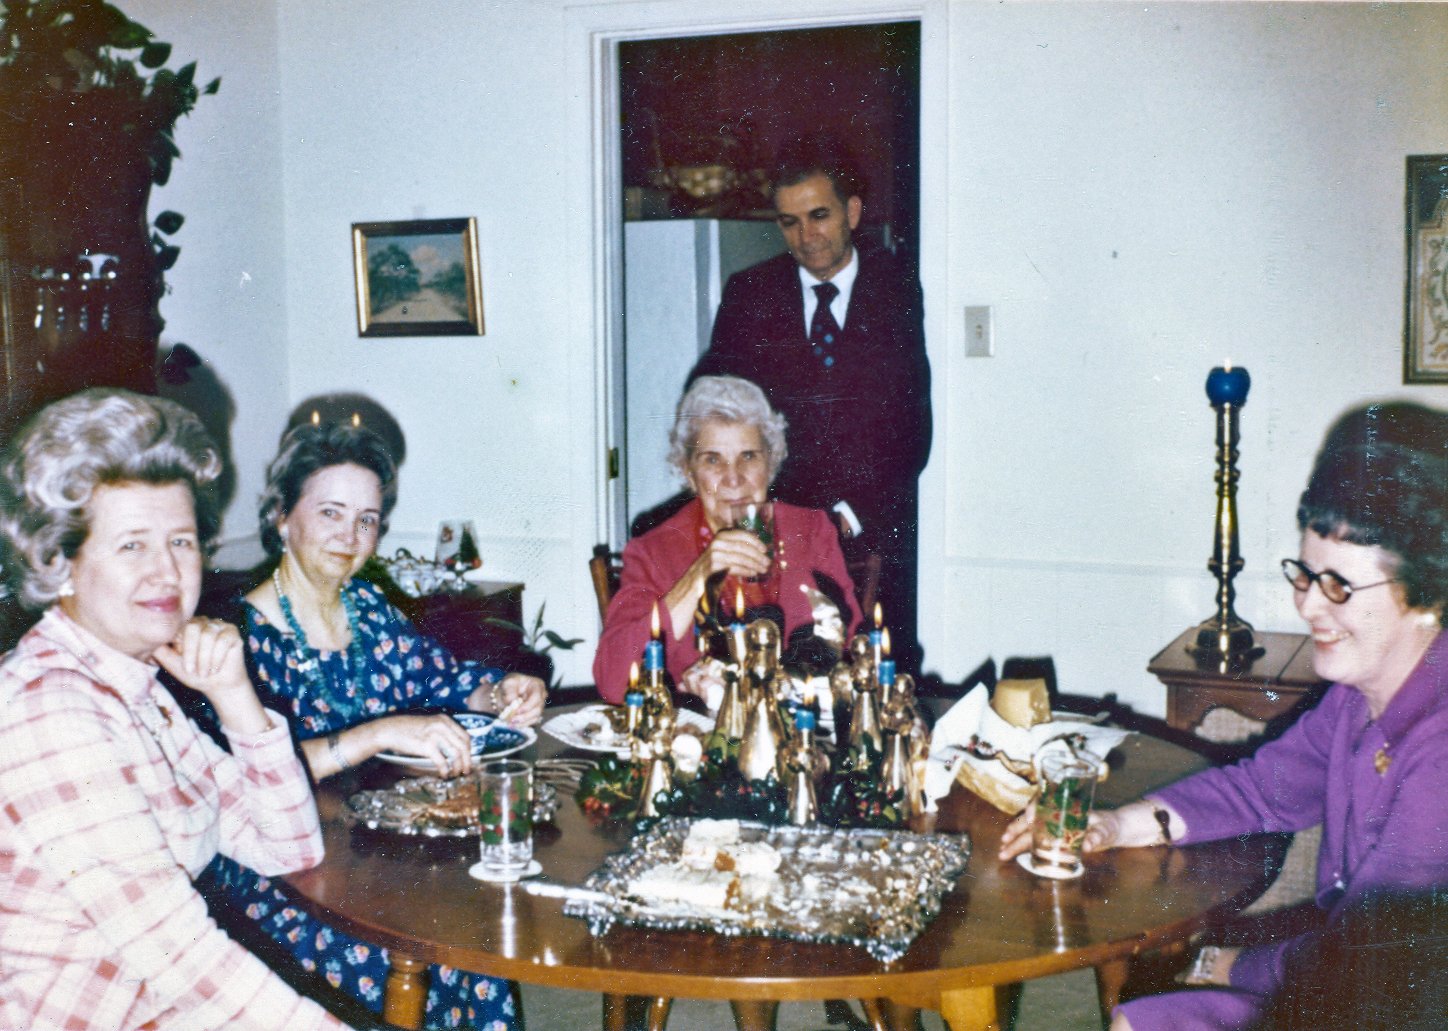 Lunch Gathering, ca 1960s